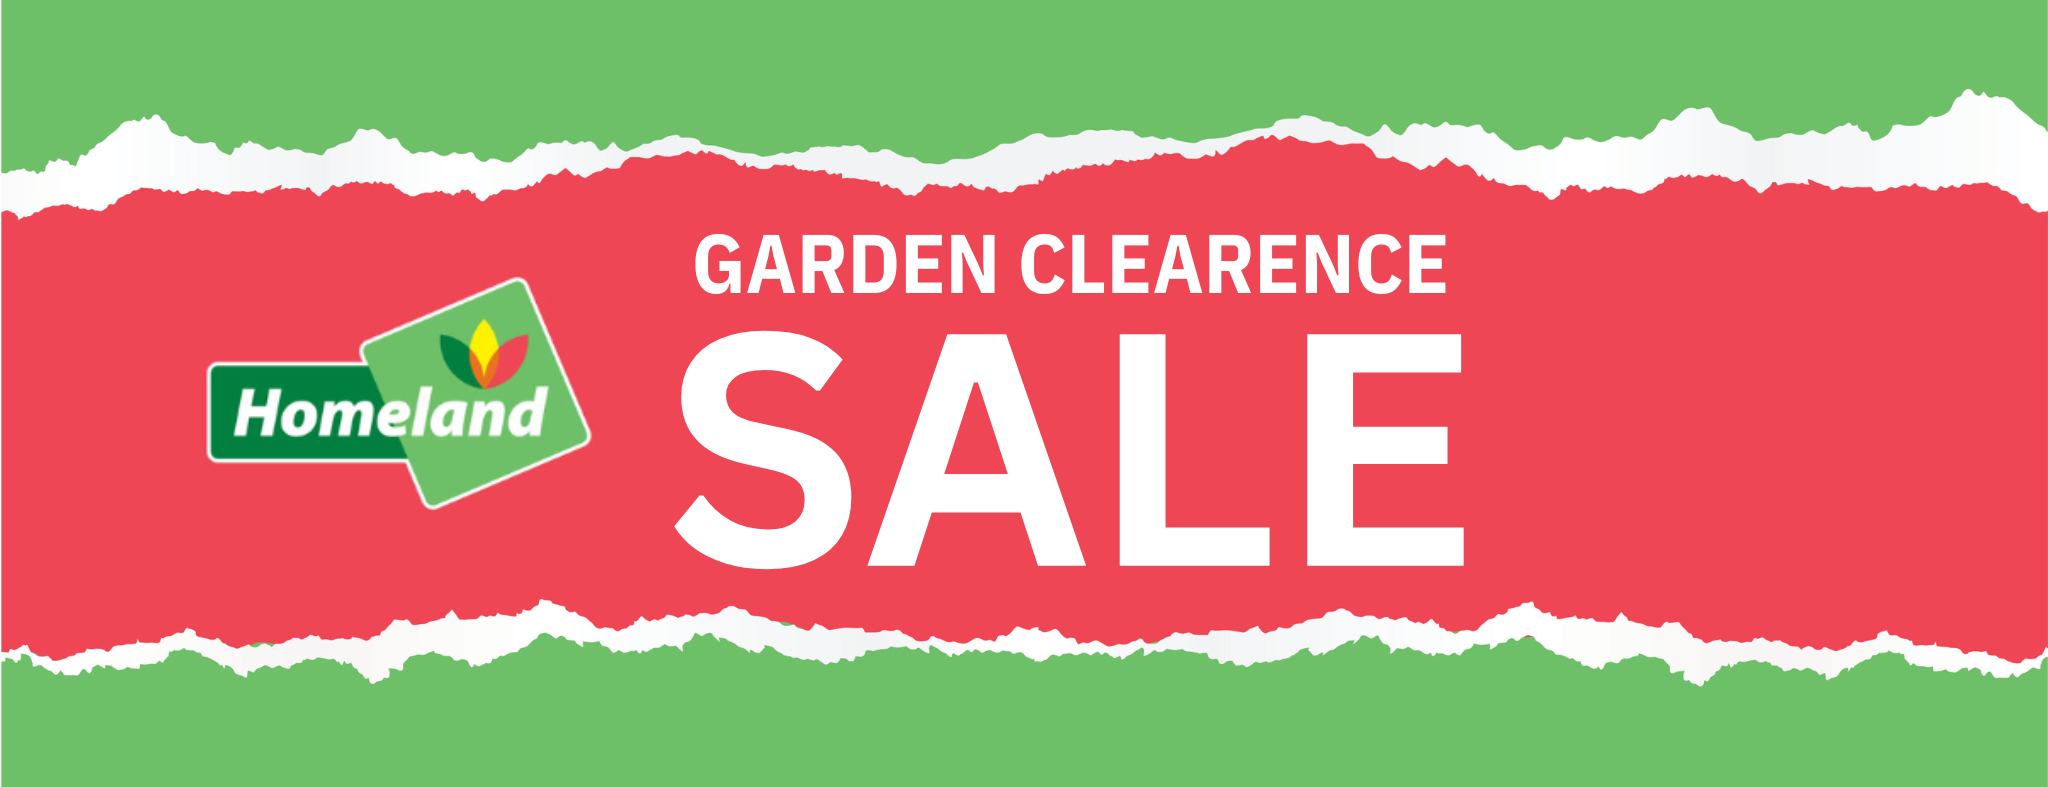 GARDEN-CLEARENCE-SALE